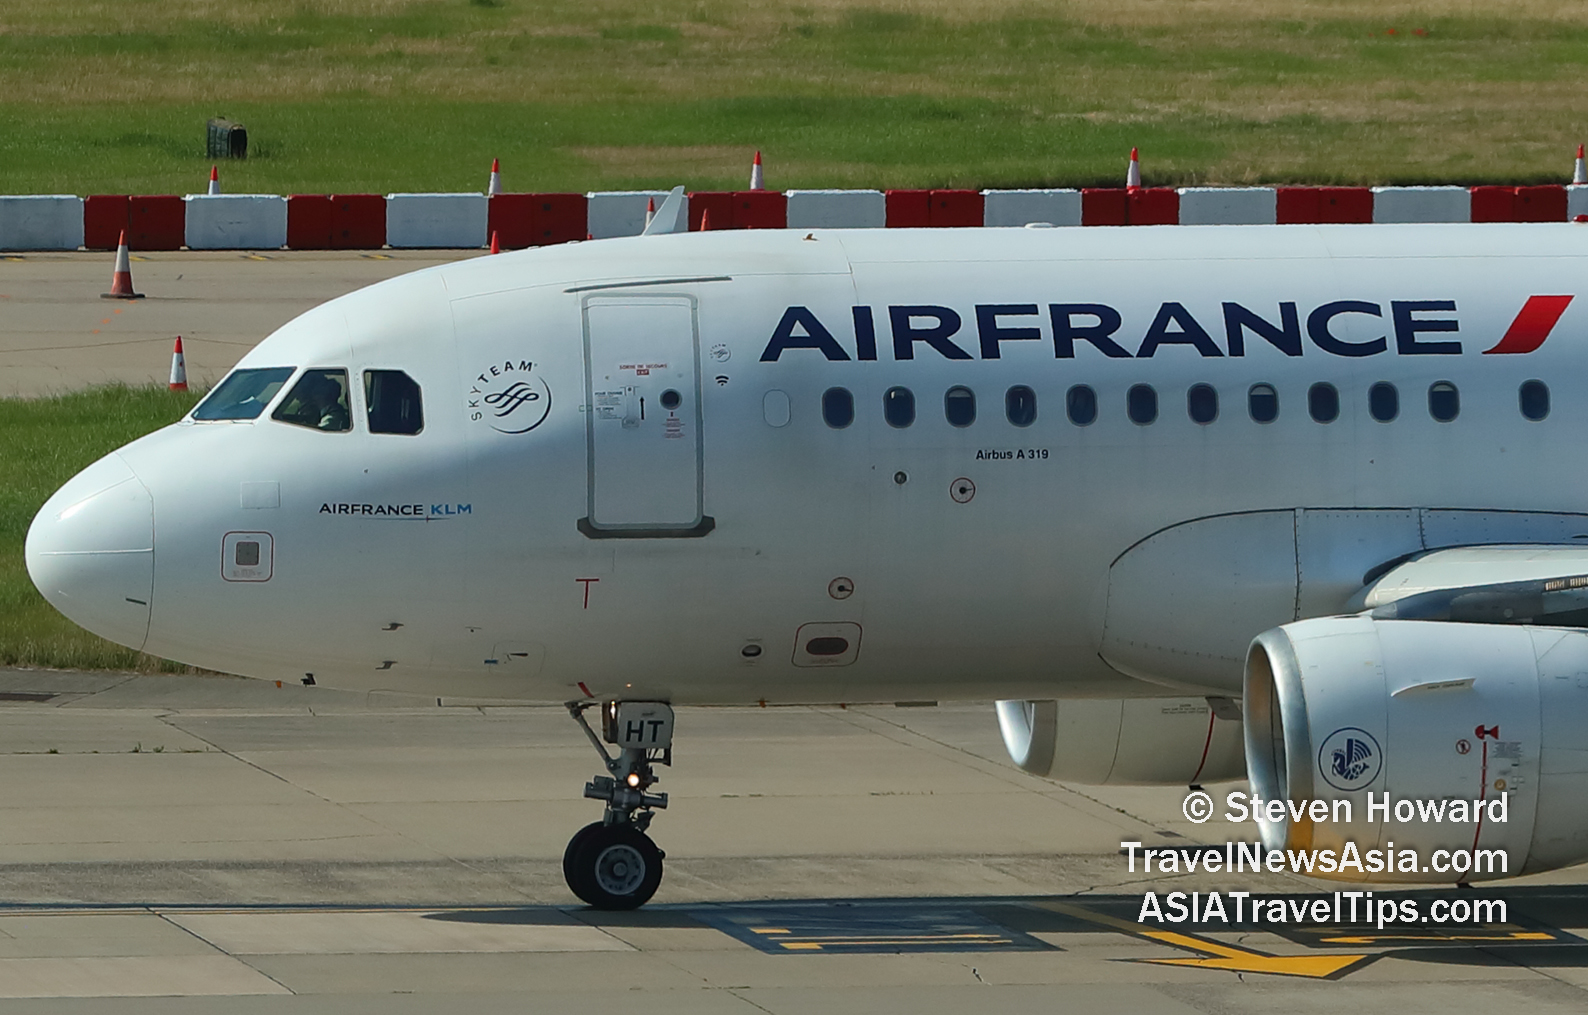 Air France Airbus A319 reg: F-GRHT. Picture by Steven Howard of TravelNewsAsia.com. Click to enlarge.